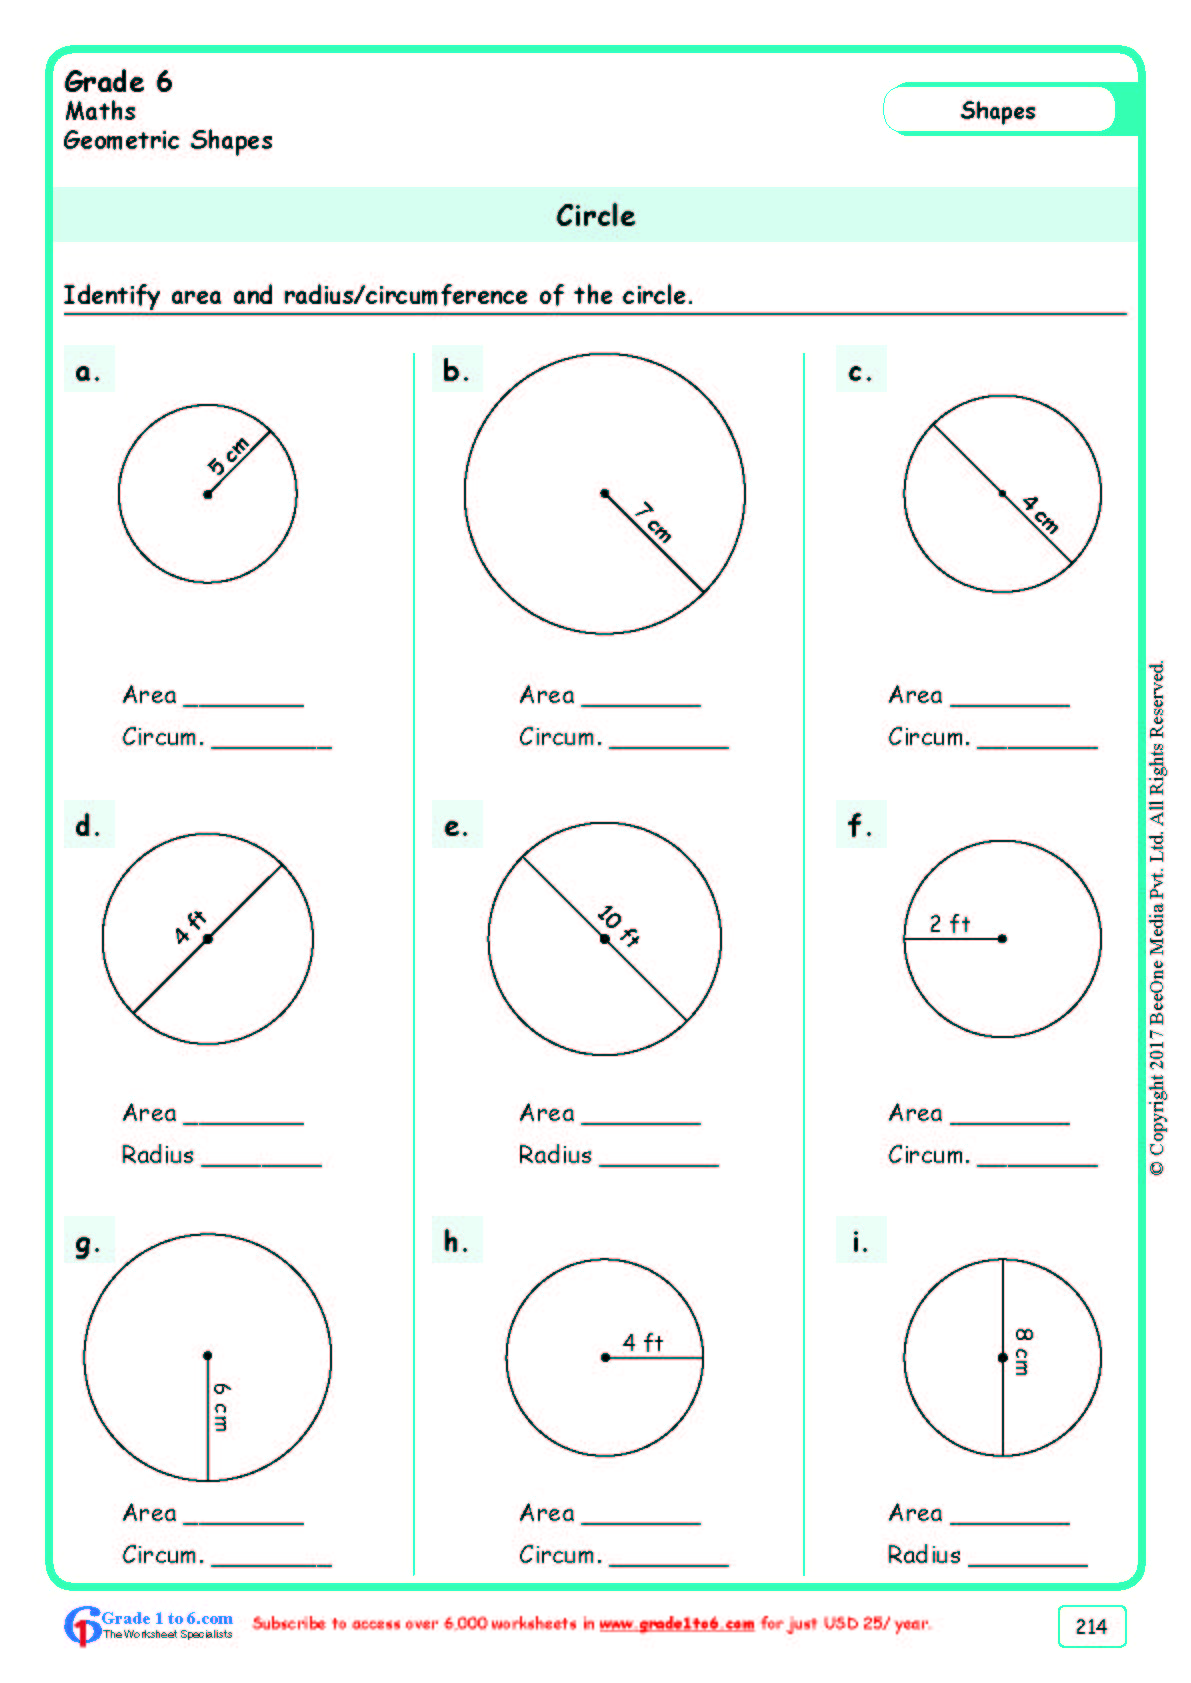 free-math-worksheets-for-grade-6-class-6-ib-cbse-icse-k12-and-all-curriculum